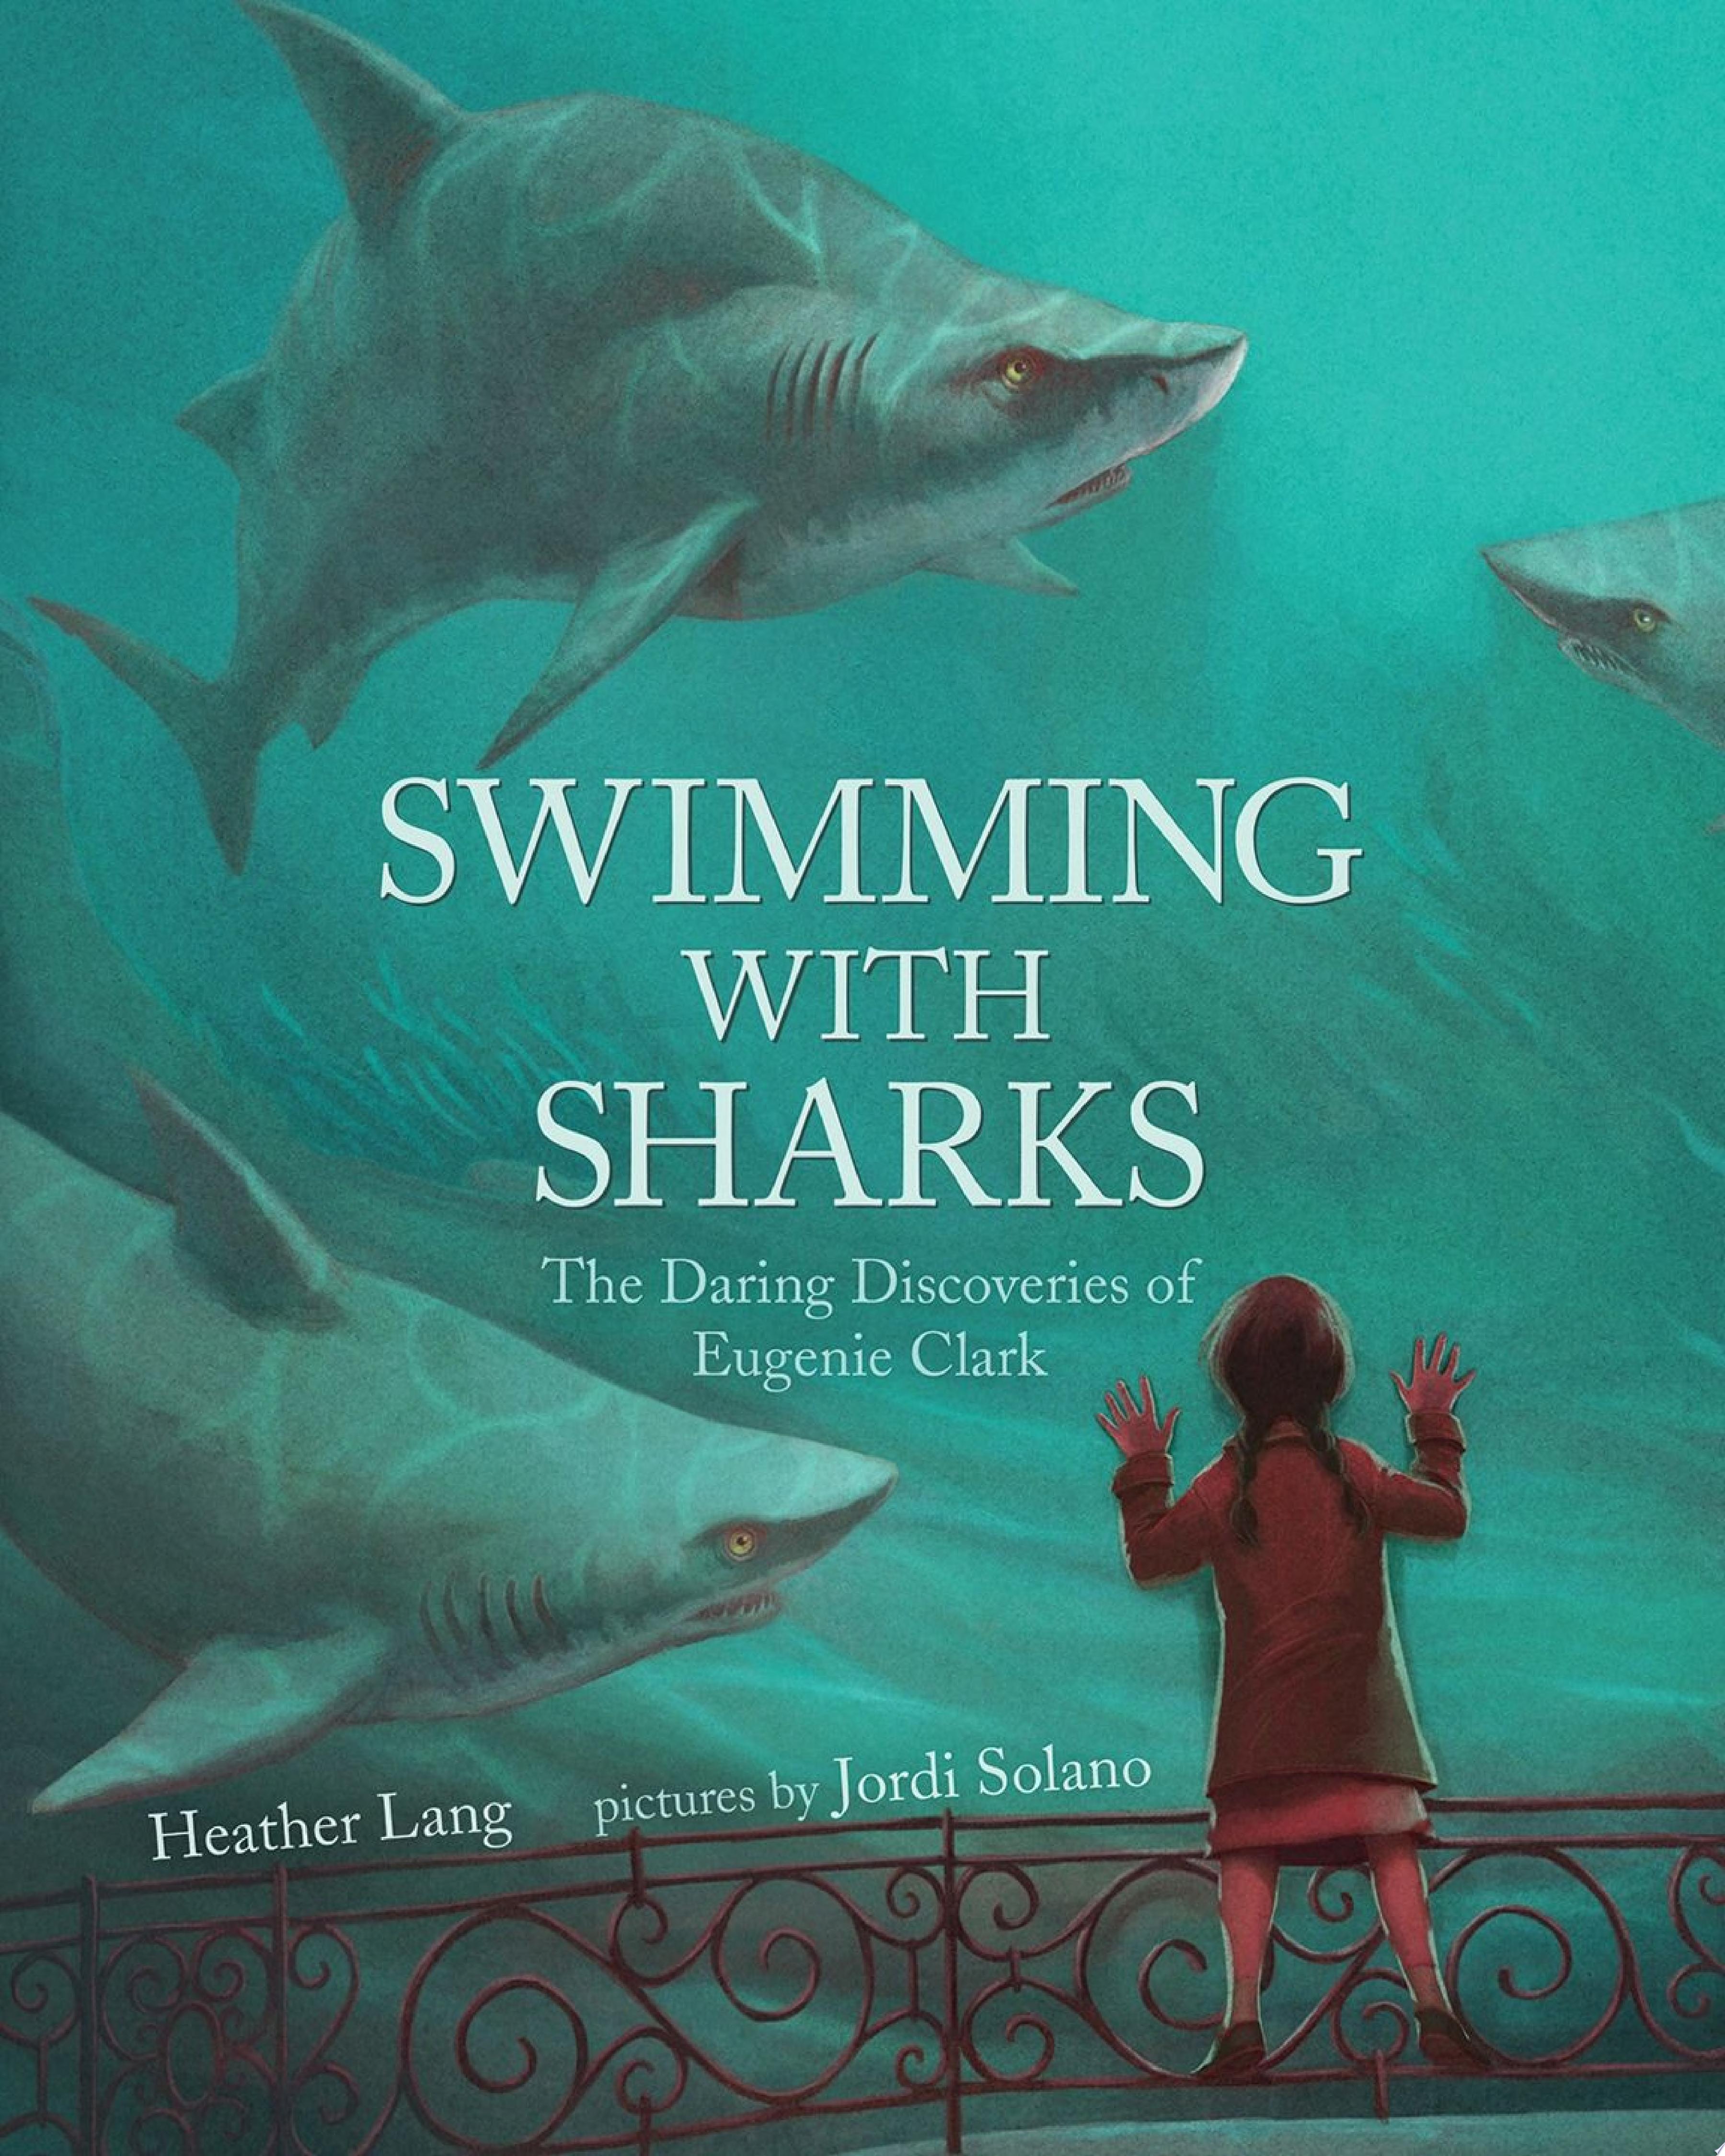 Image for "Swimming with Sharks"